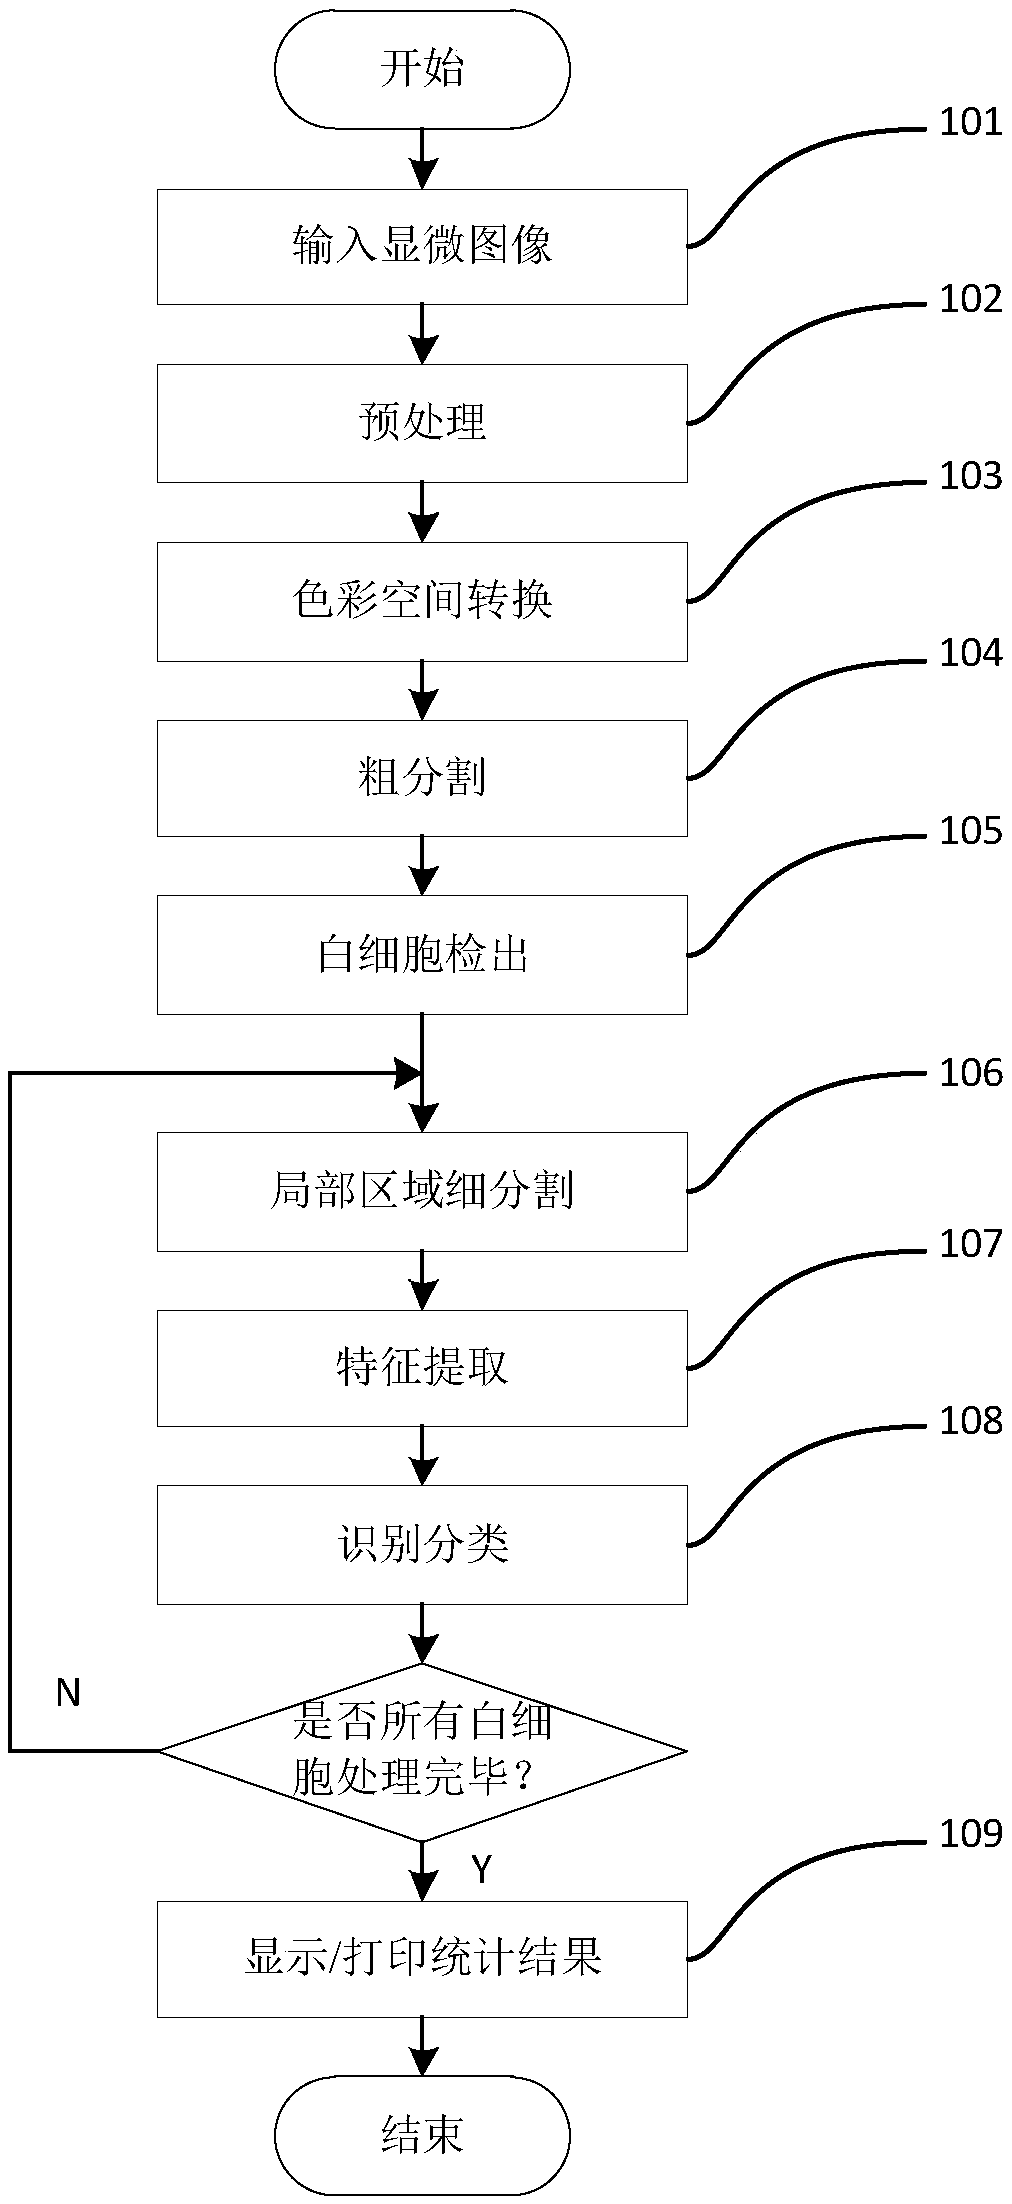 Nu-support vector machine-based white cell classification method